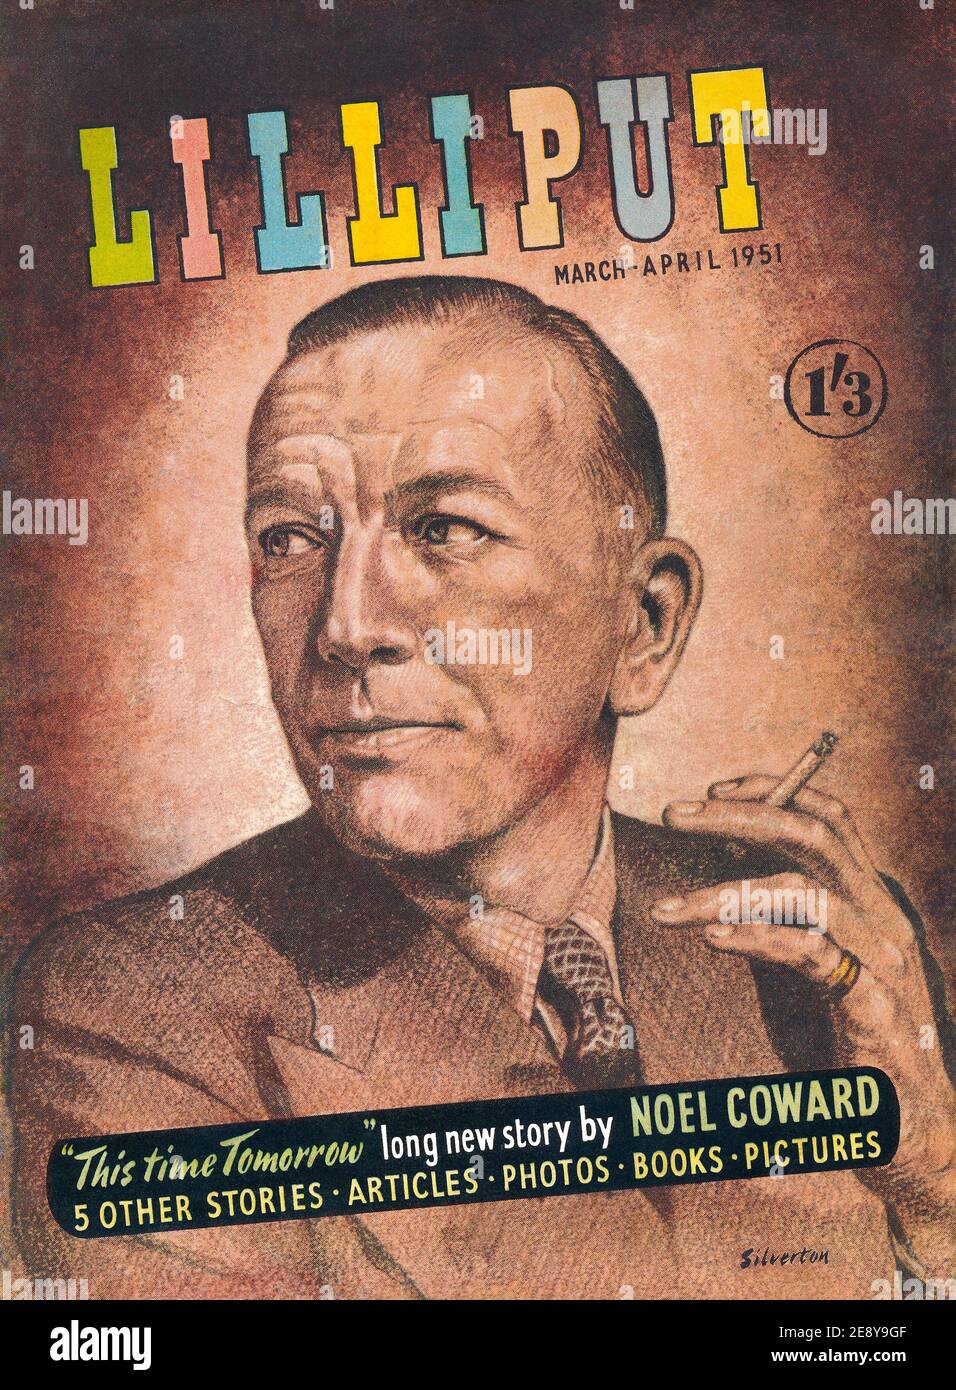 Vintage front cover of Lilliput magazine for March-April 1951, featuring an illustration of Noel Coward. Stock Photo